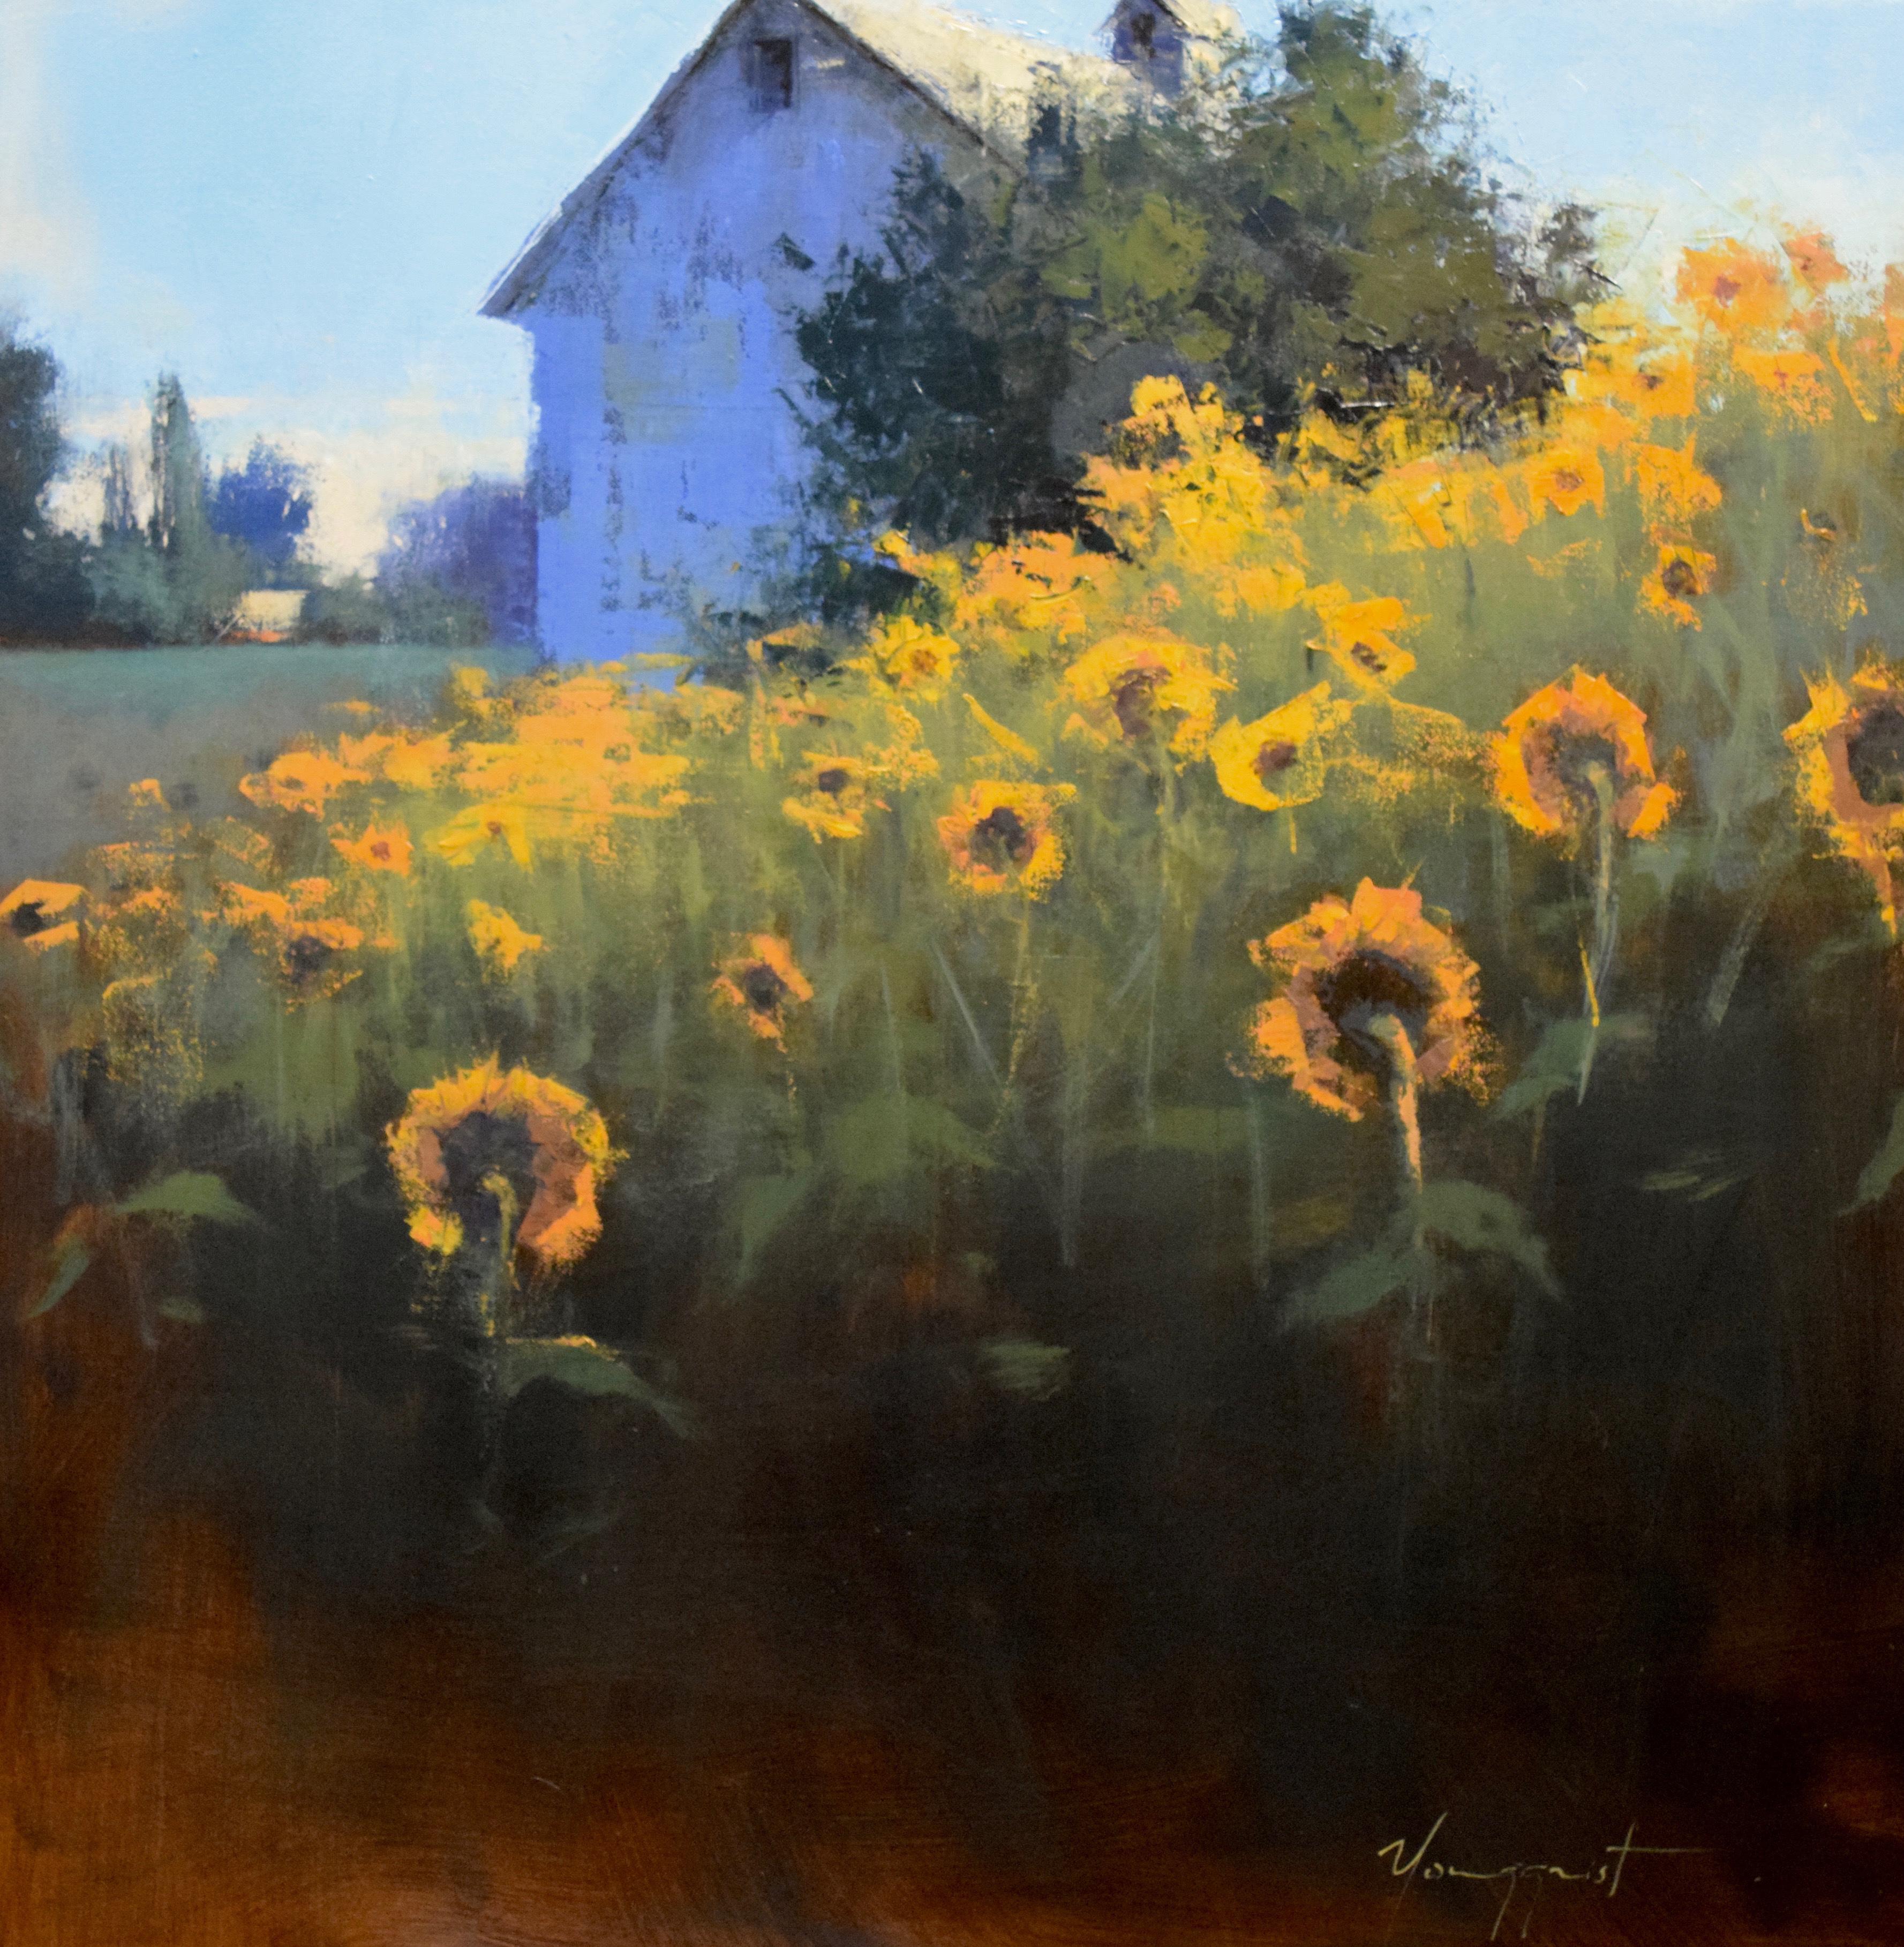 Romona Youngquist, Landscape Painting - "Sunflowers Facing East"